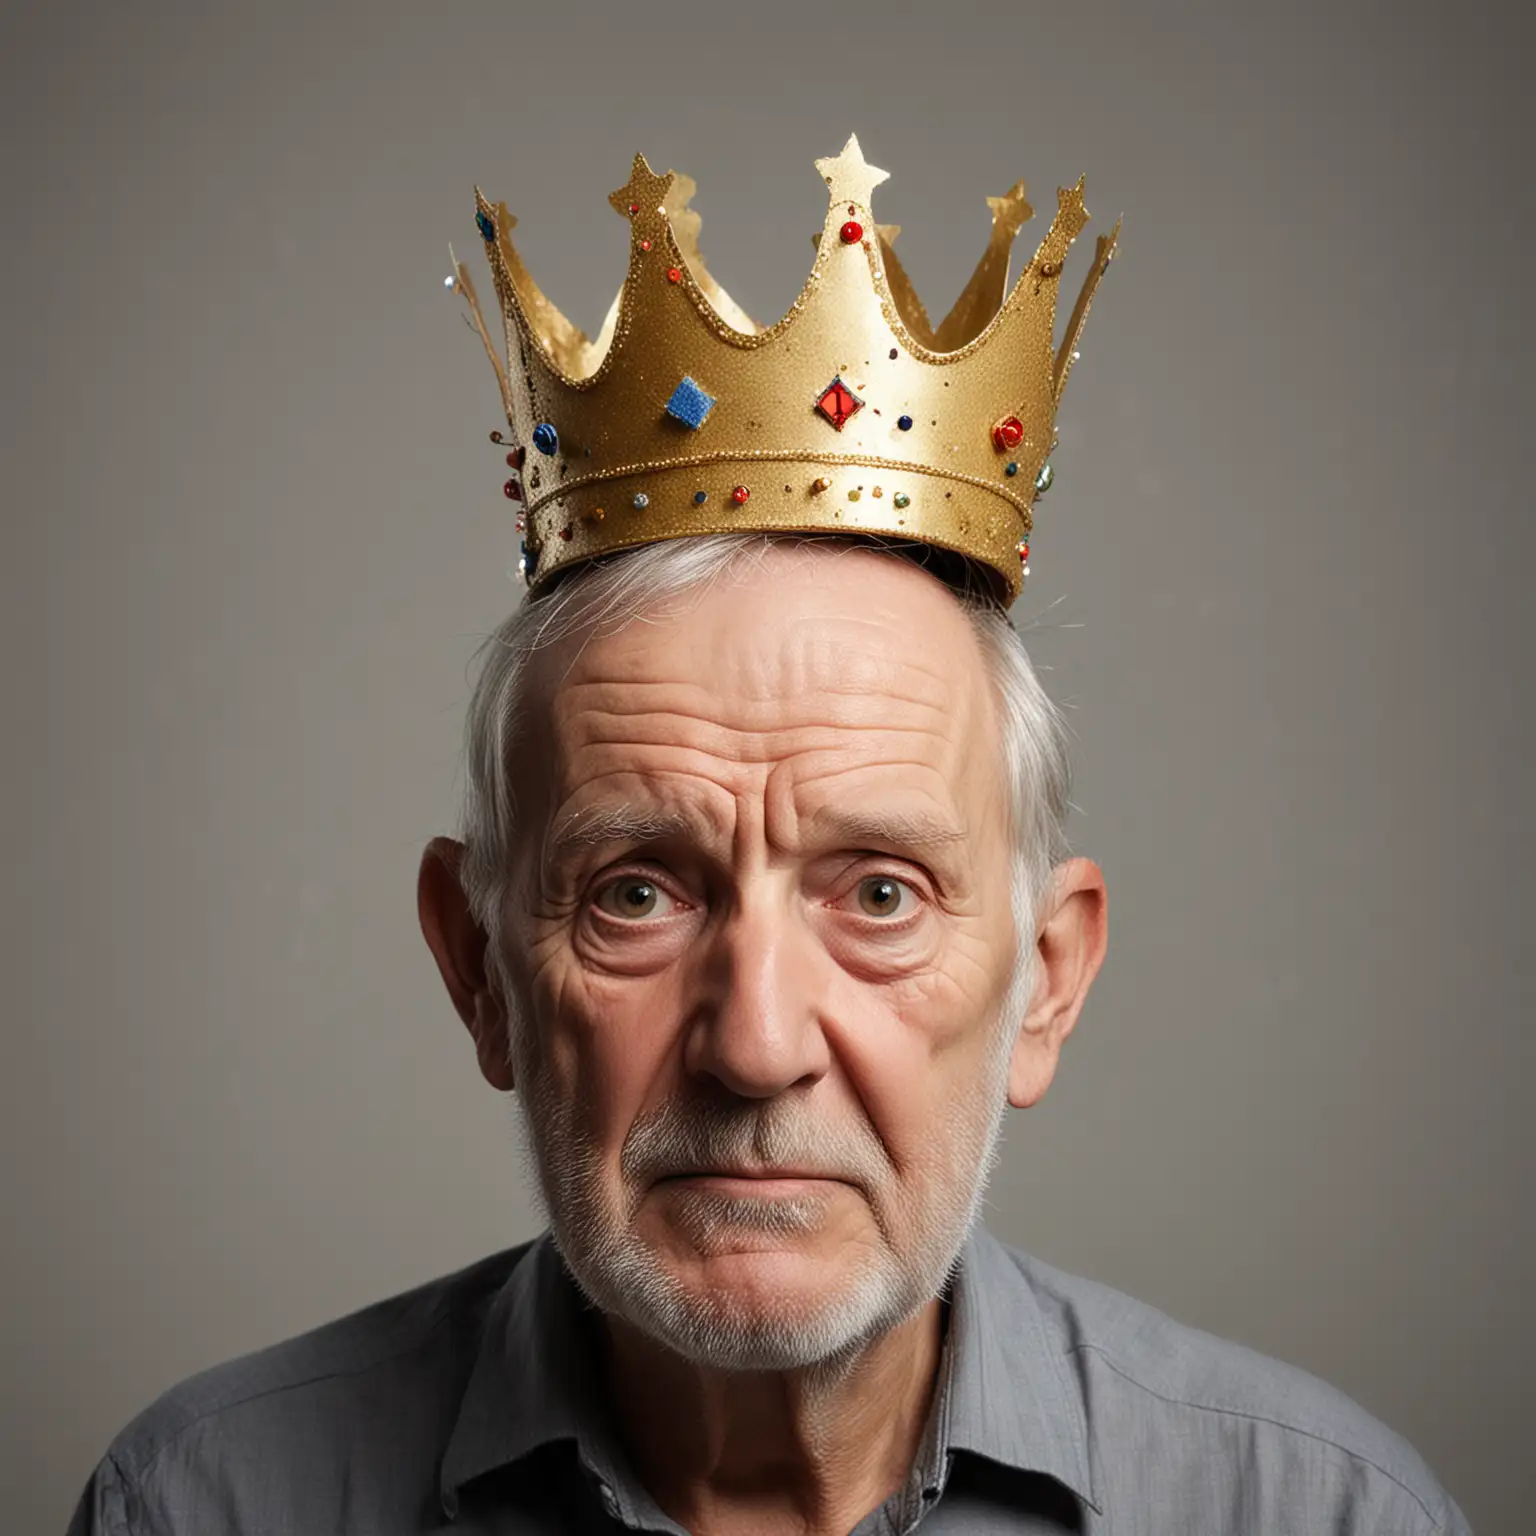 birthday crown on old man`s head. Dull lighting on grey background.